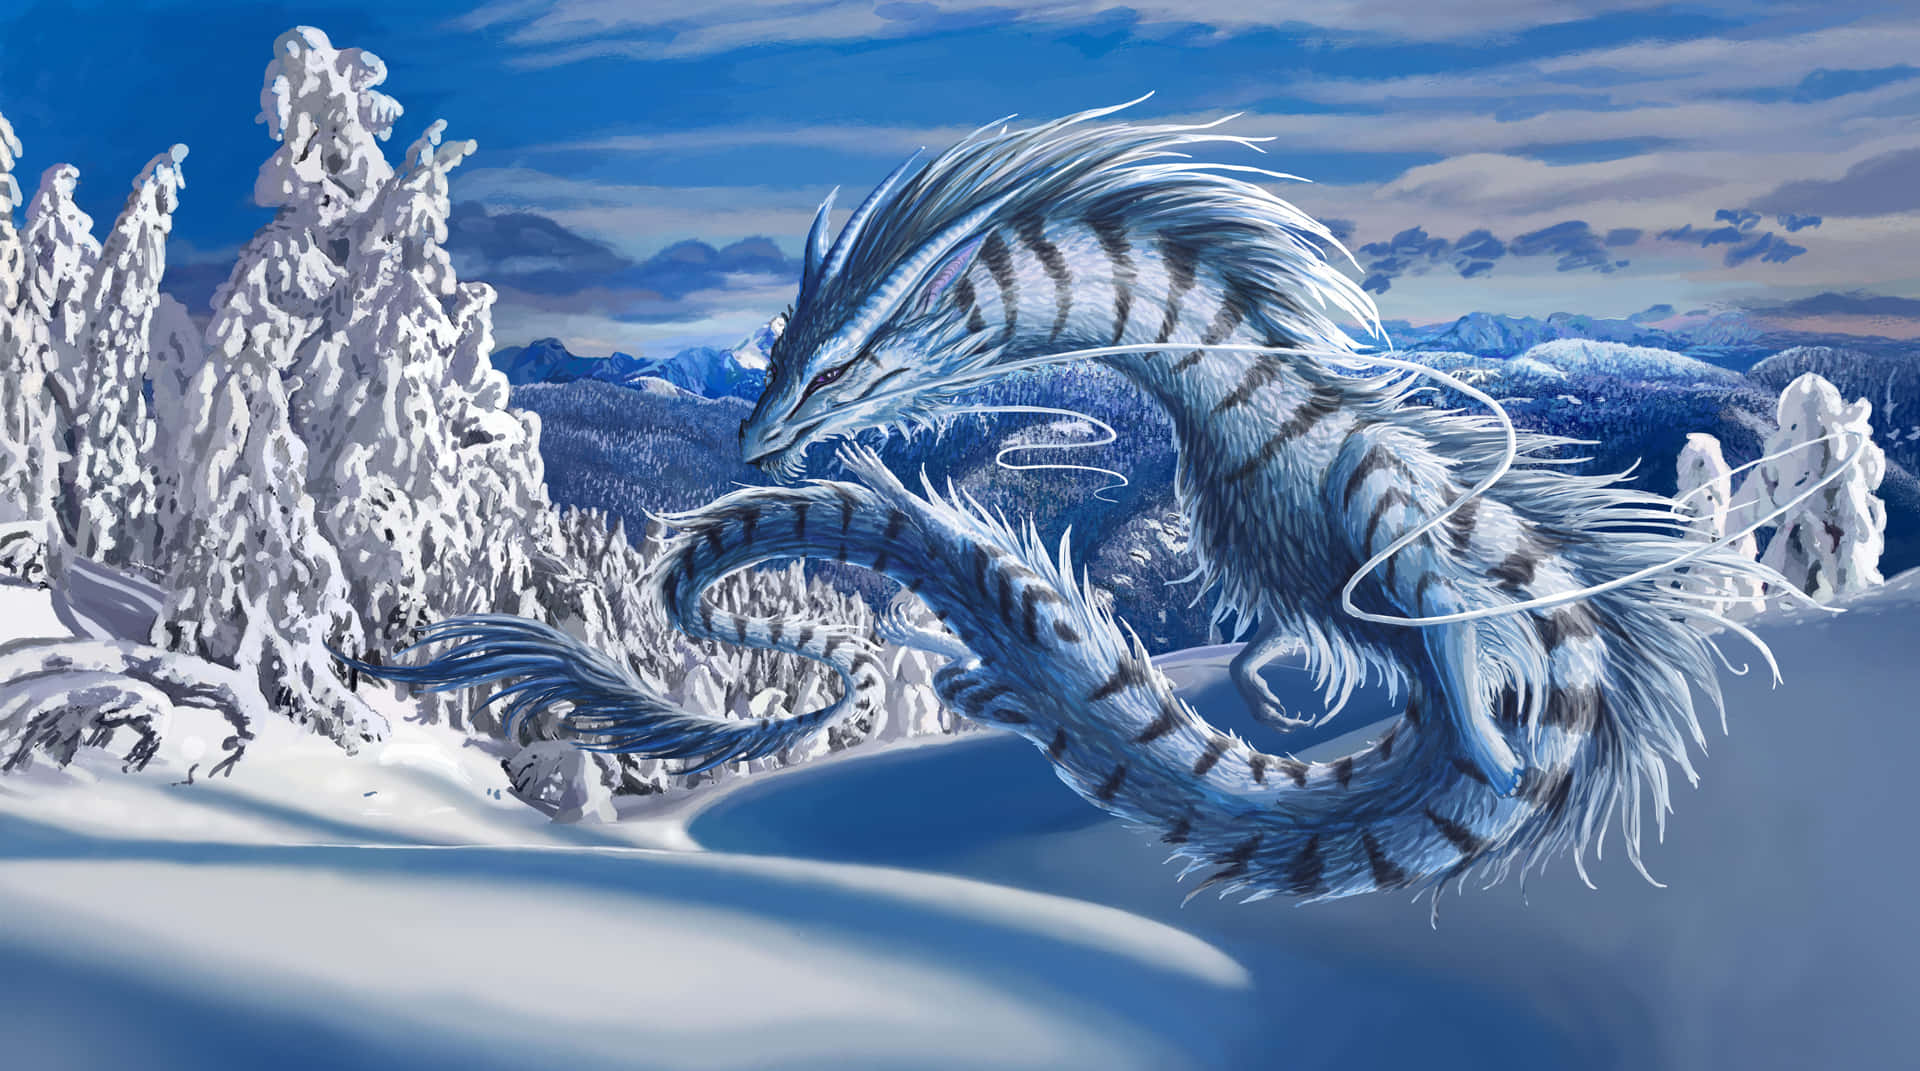 A Dream of a Mythical Dragon Wallpaper